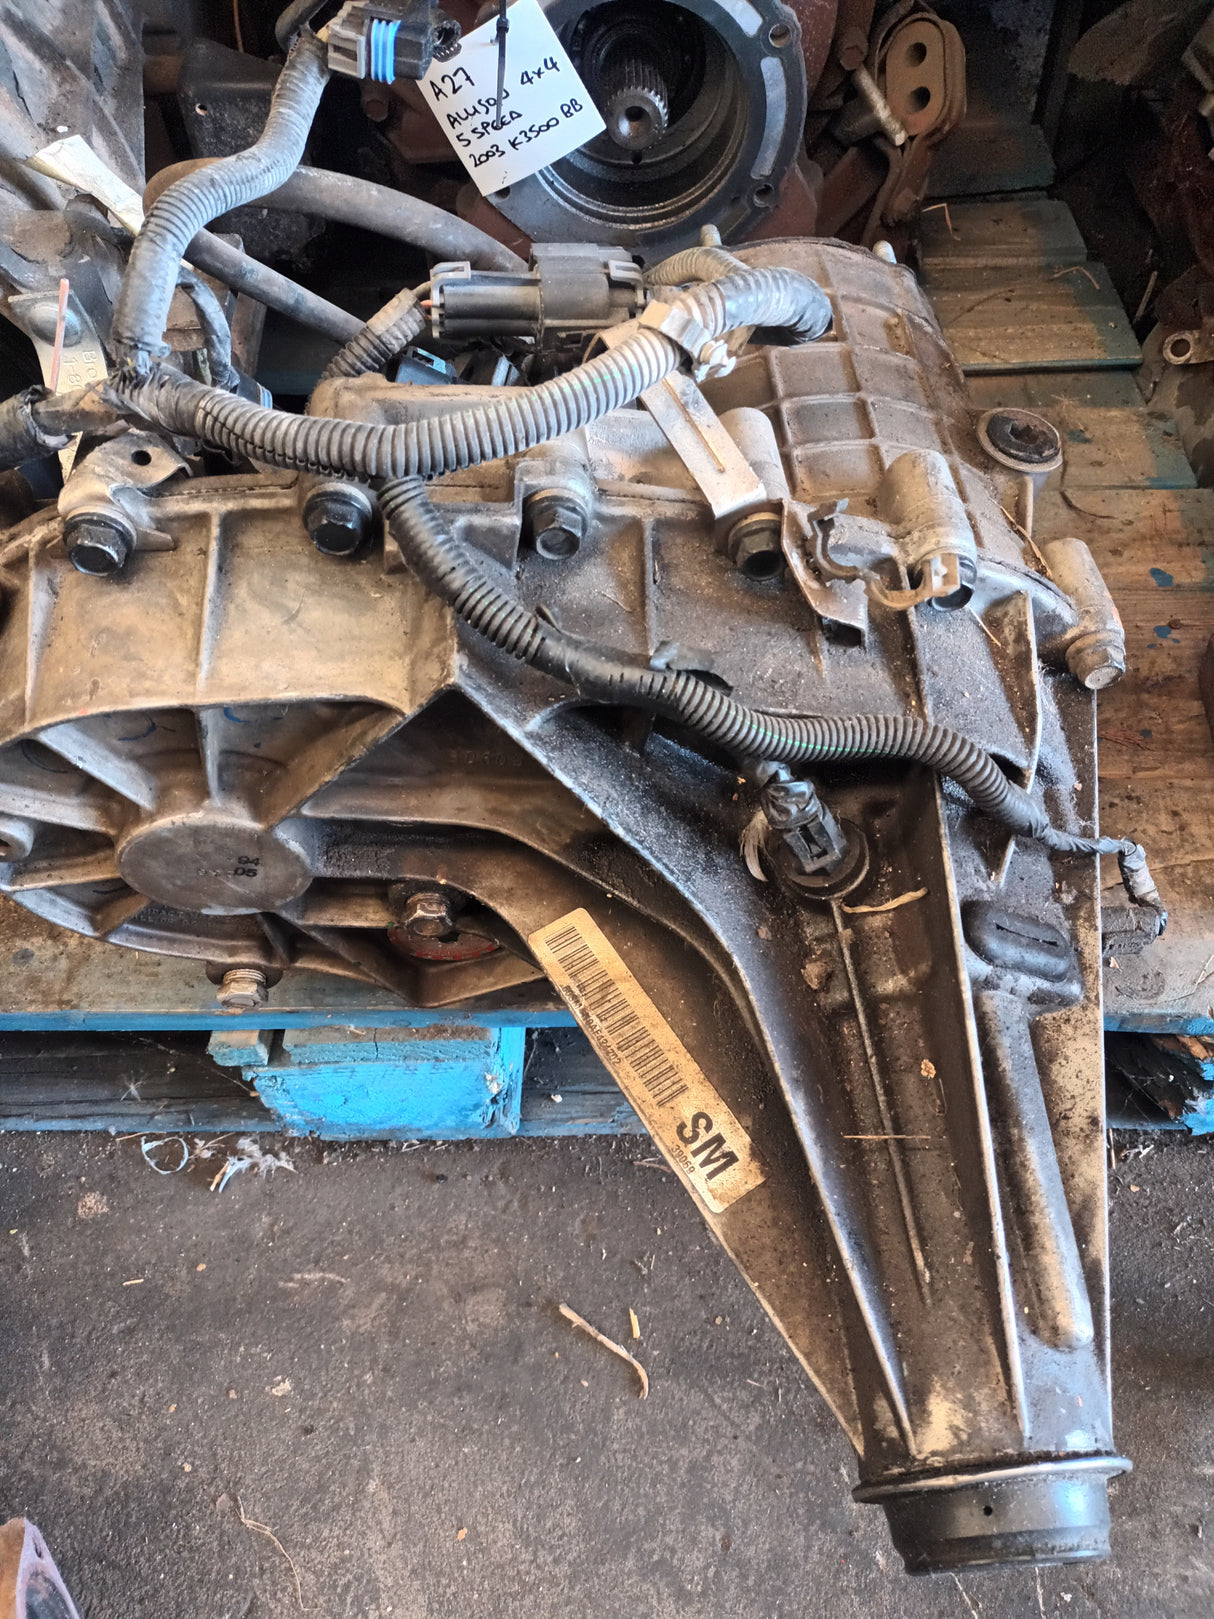 CHEV 4X4 TRANSFER CASE EX 496 BB 2003 K3500 WITH ELLISON TRANS. IN REBUILDABLE CONDITION.